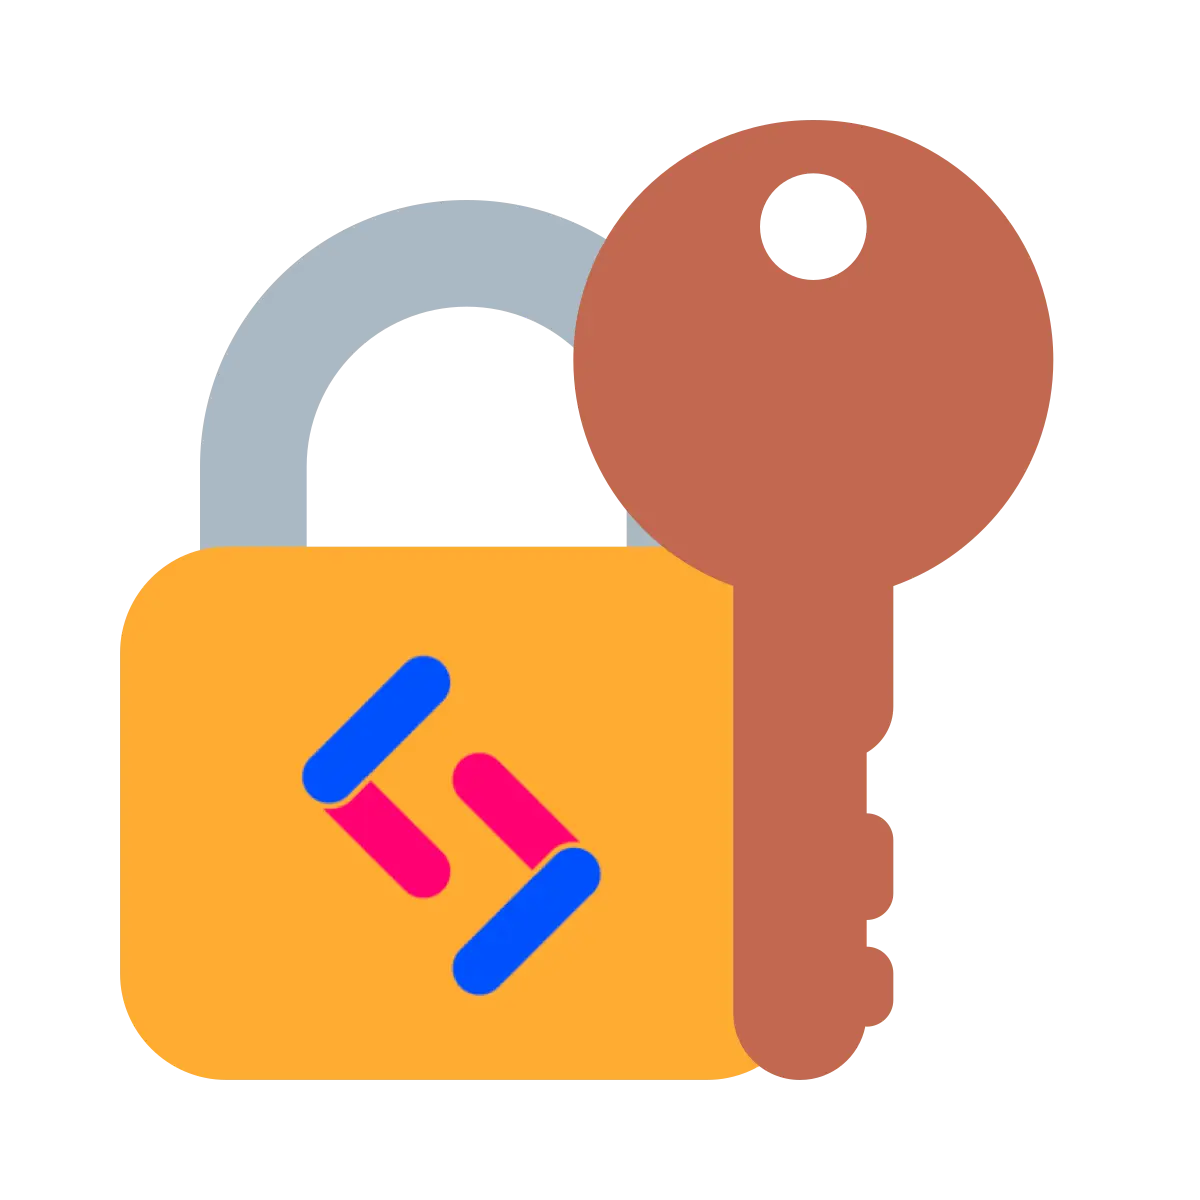 The SignalWire logo superimposed on clip art representing a lock and key.